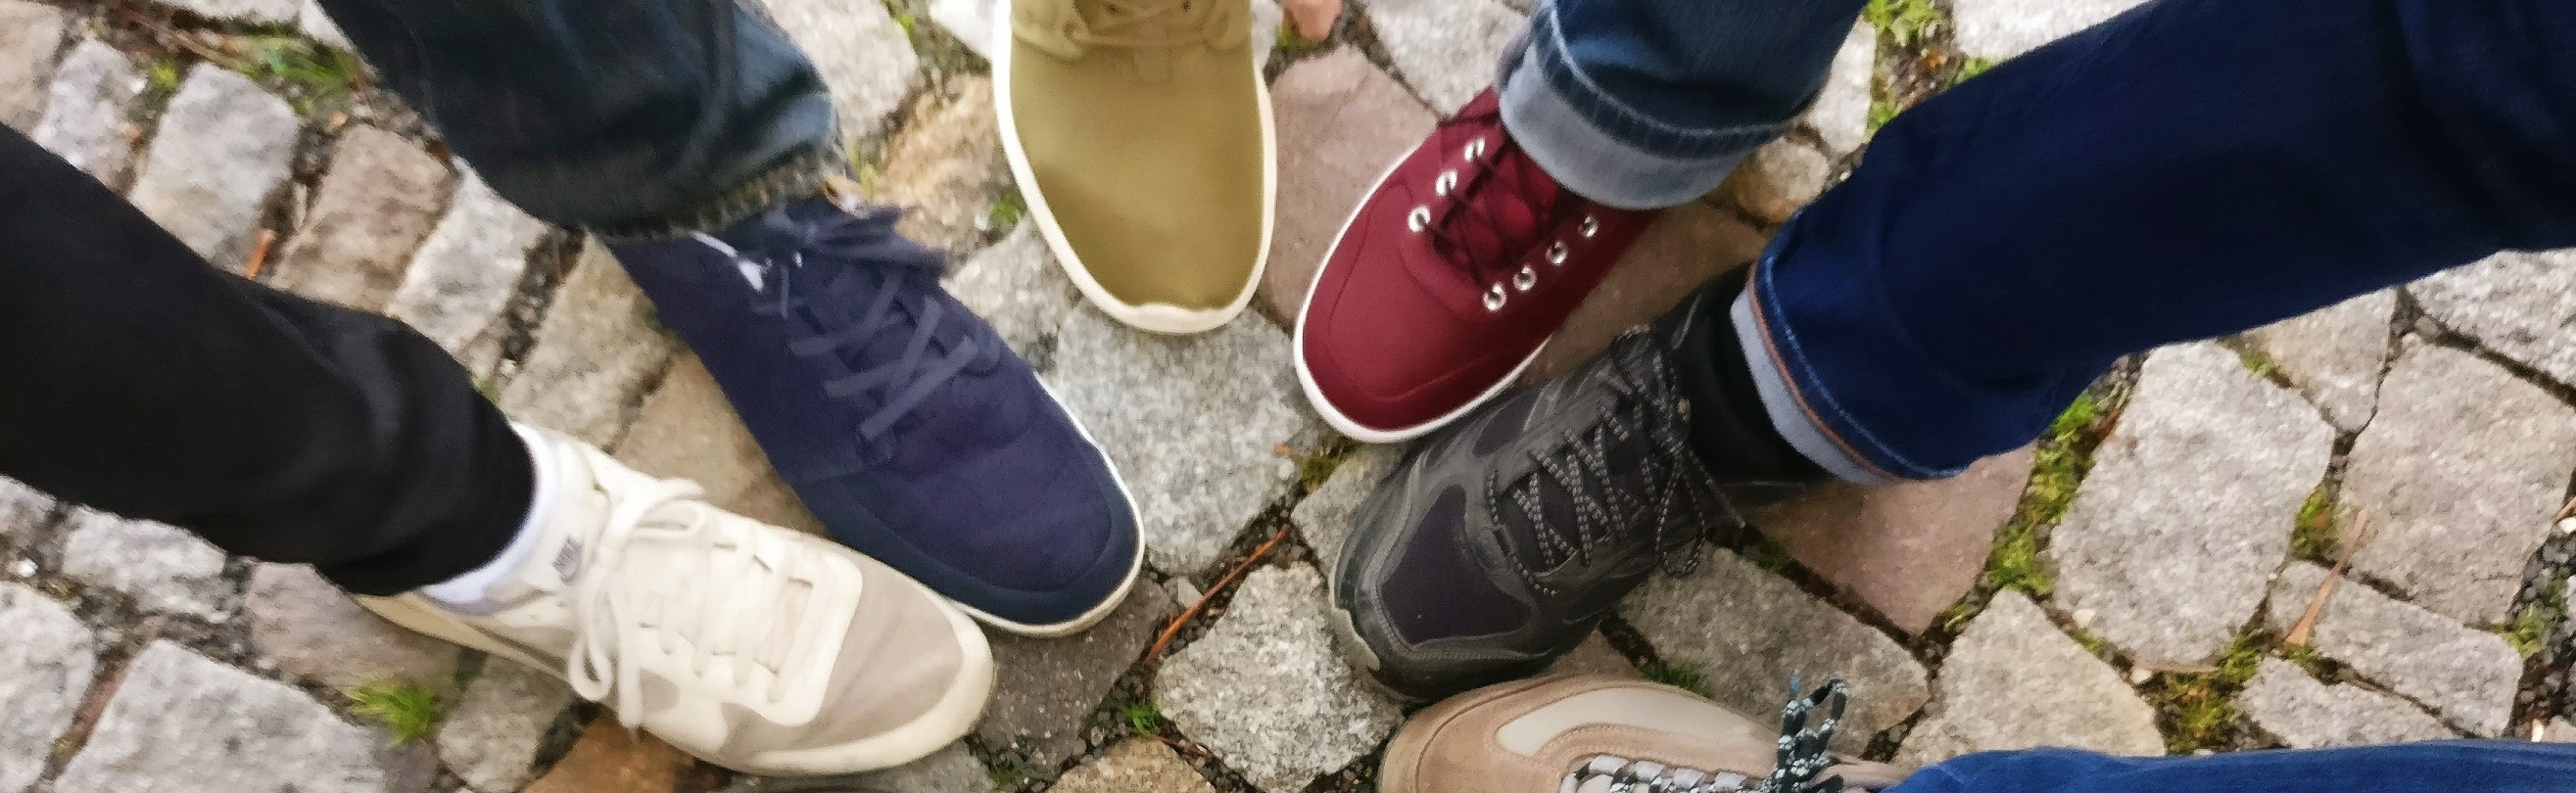 People standing in circle with legs and shoes pointing inward